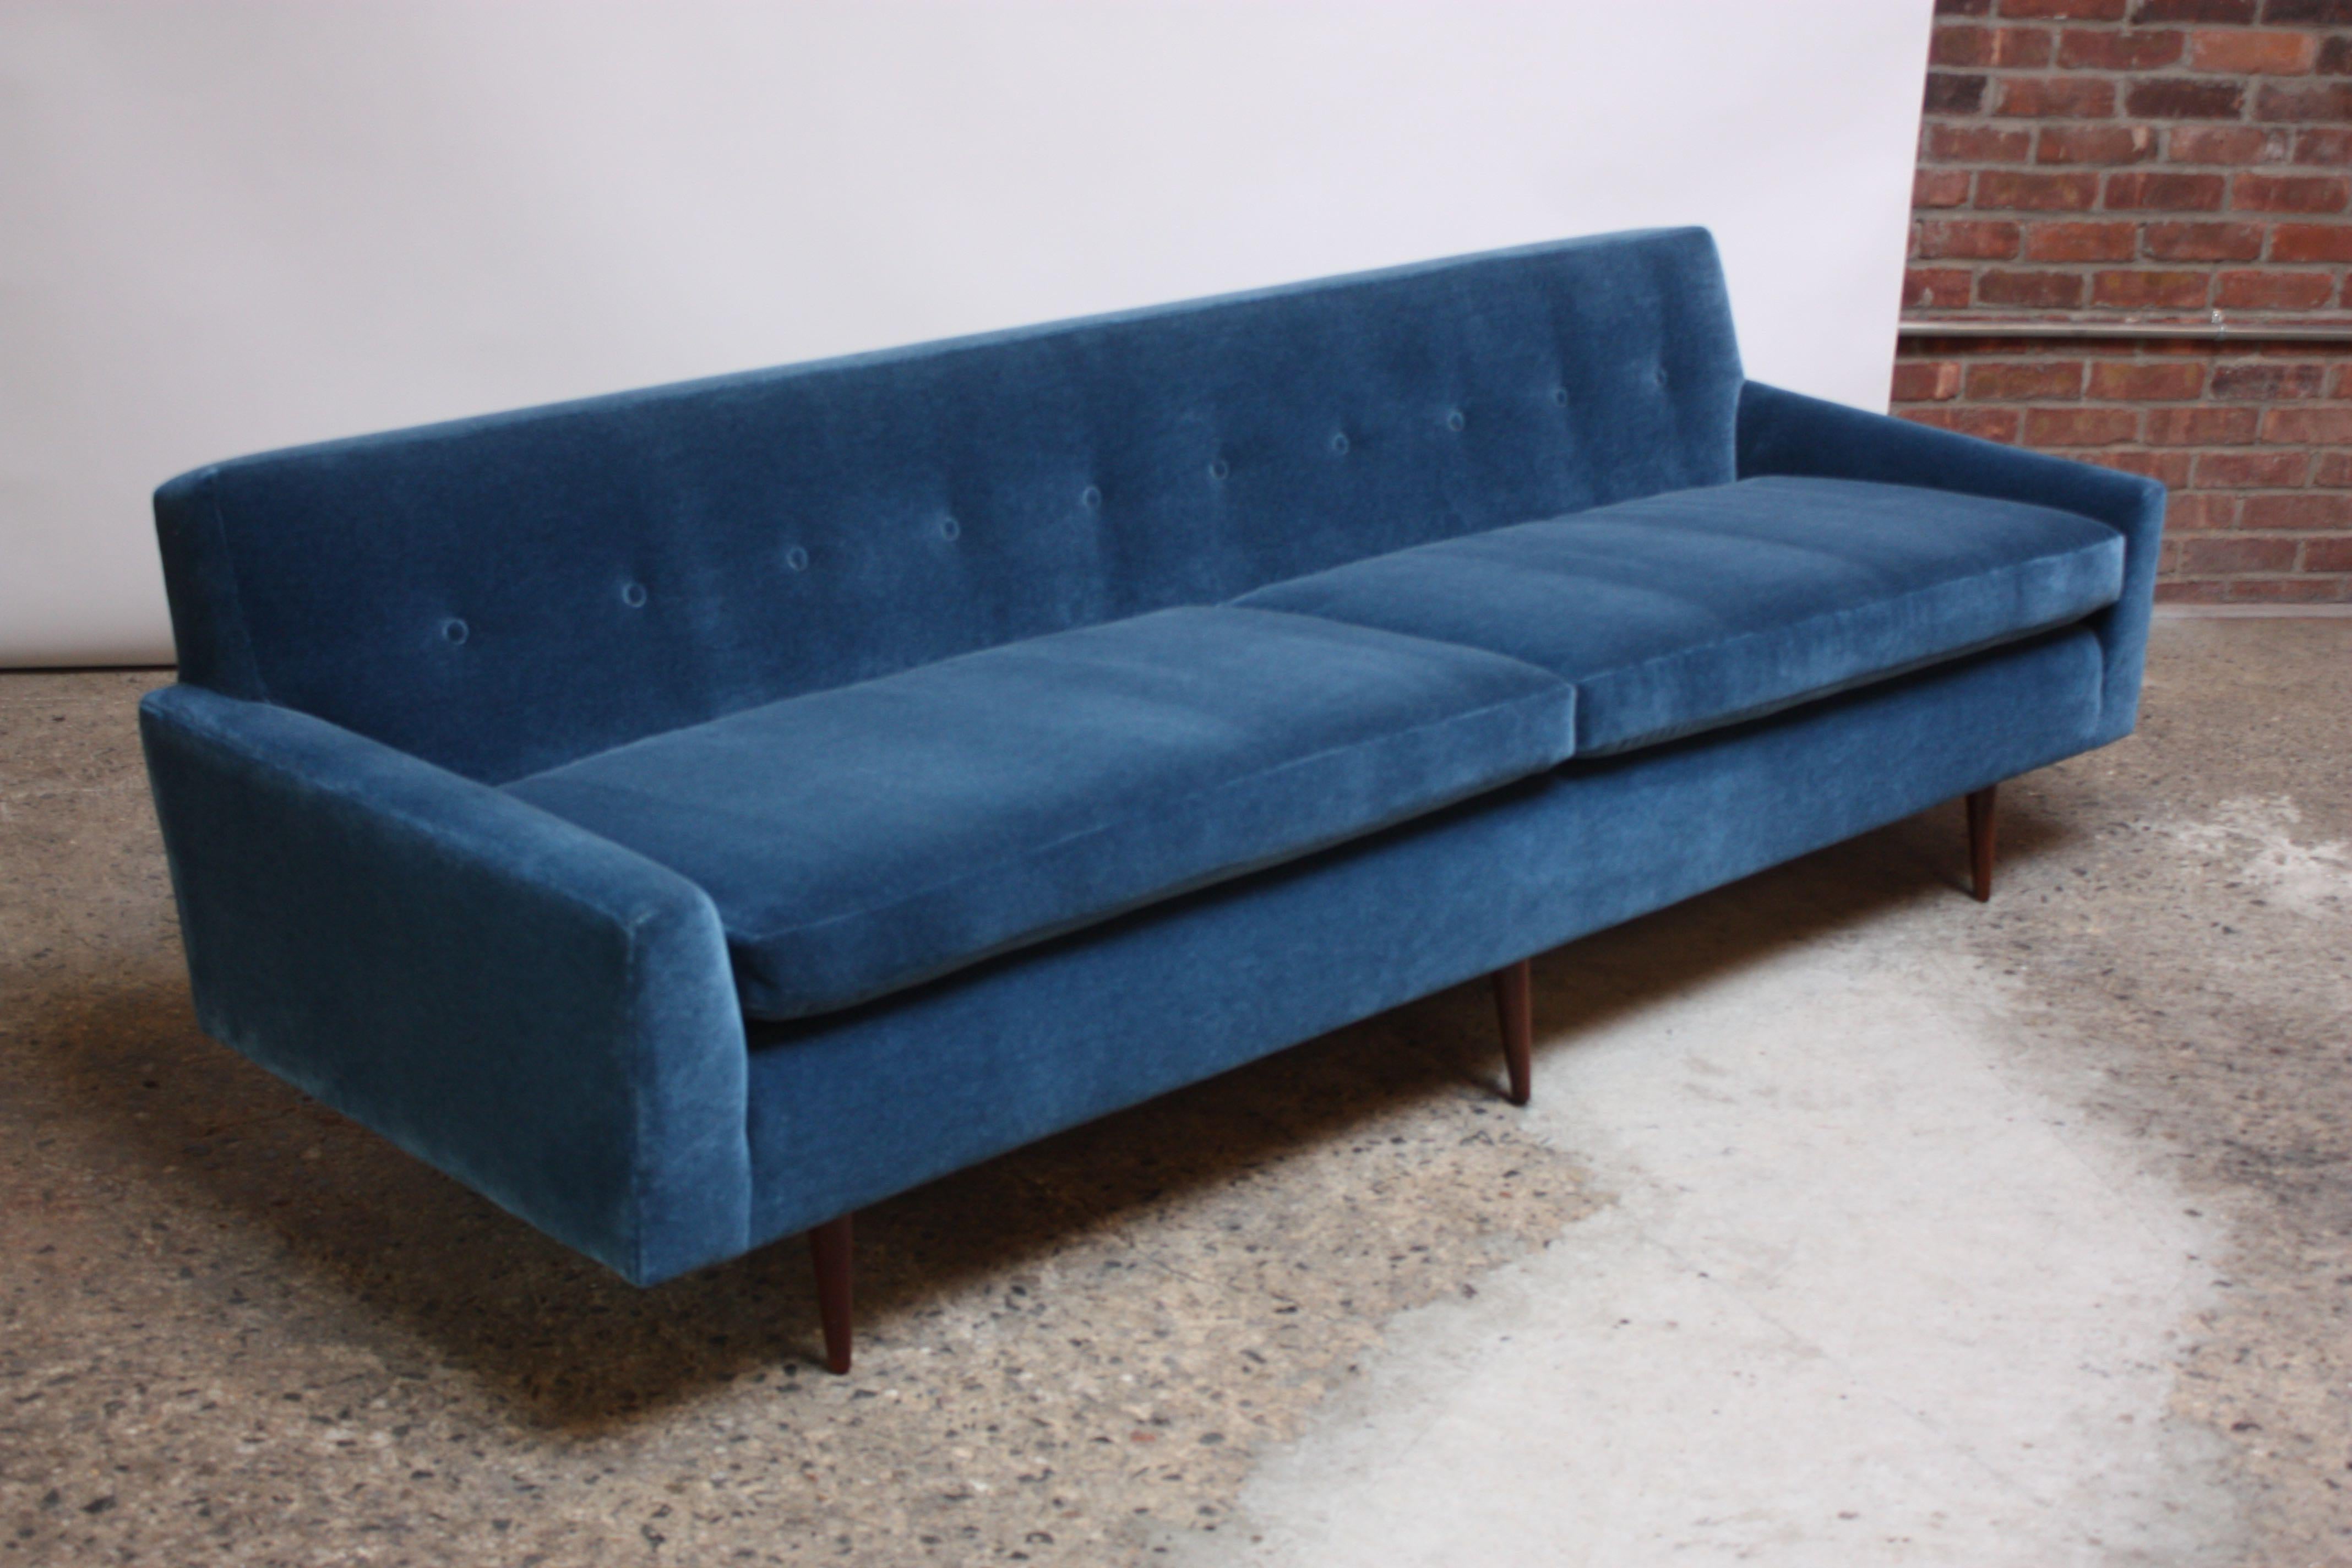 Milo Baughman for Thayer Coggin sofa newly reupholstered in luxurious blue mohair with brand new foam. Tufting / scale of cushion executed to mirror that of the original. Frame is supported by conical dowel legs (three in the front, three in the